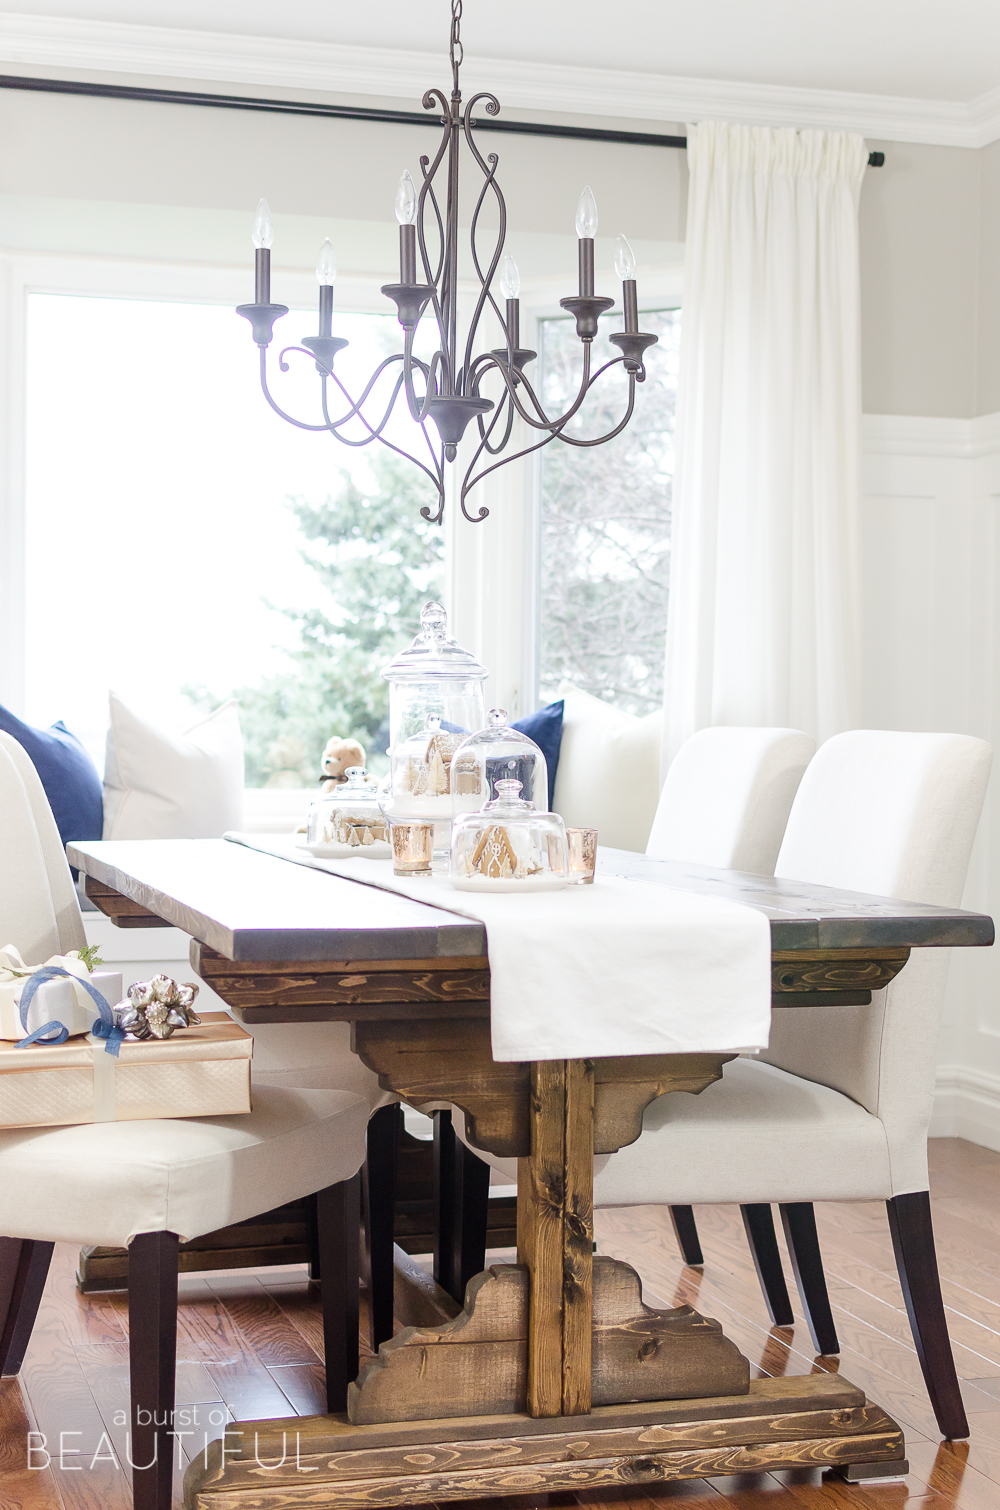 An inviting holiday dining room in this modern farmhouse is full of whimsical Christmas charm